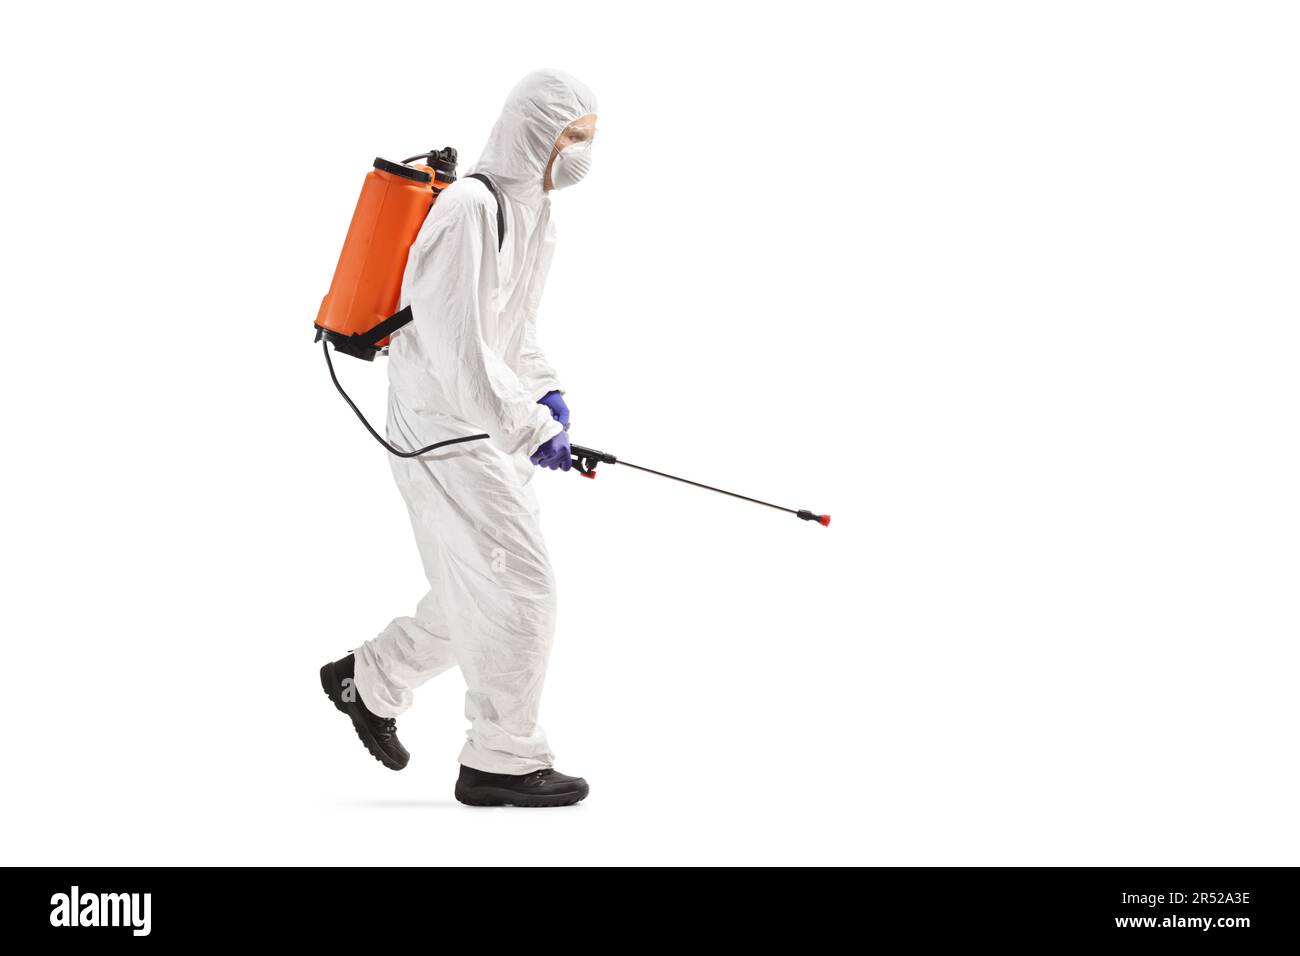 Full length profile shot of a professional worker in a hazmat suit walking and spraying a disinfectant isolated on white background Stock Photo